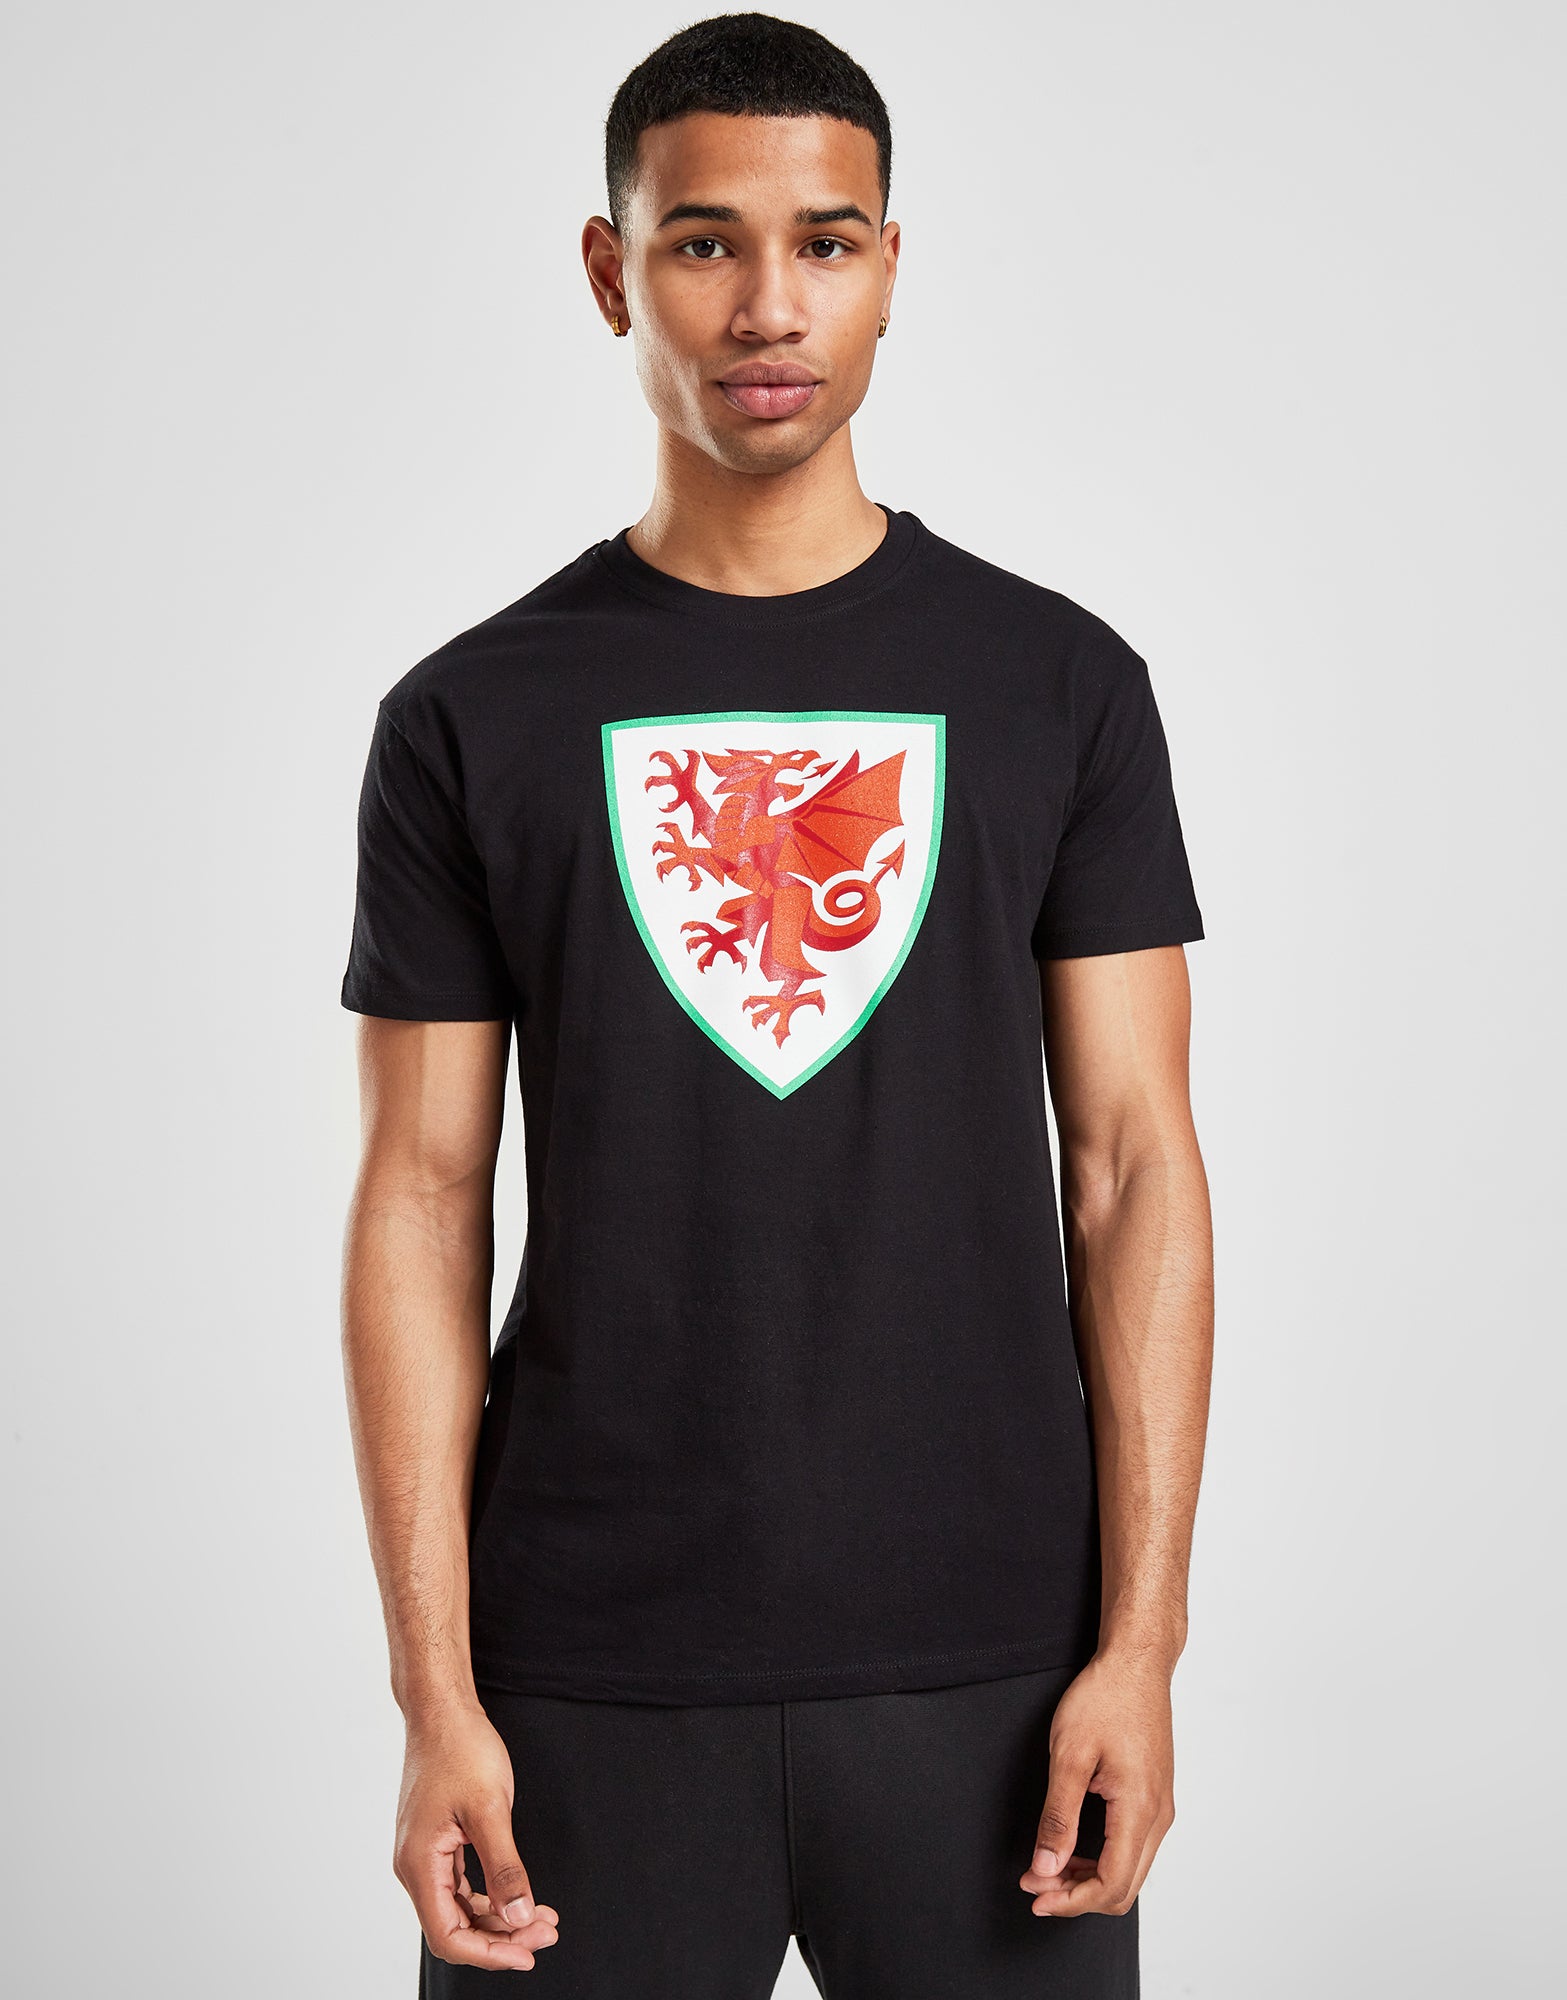 Official Team Wales Crest T-Shirt - Black - The World Football Store